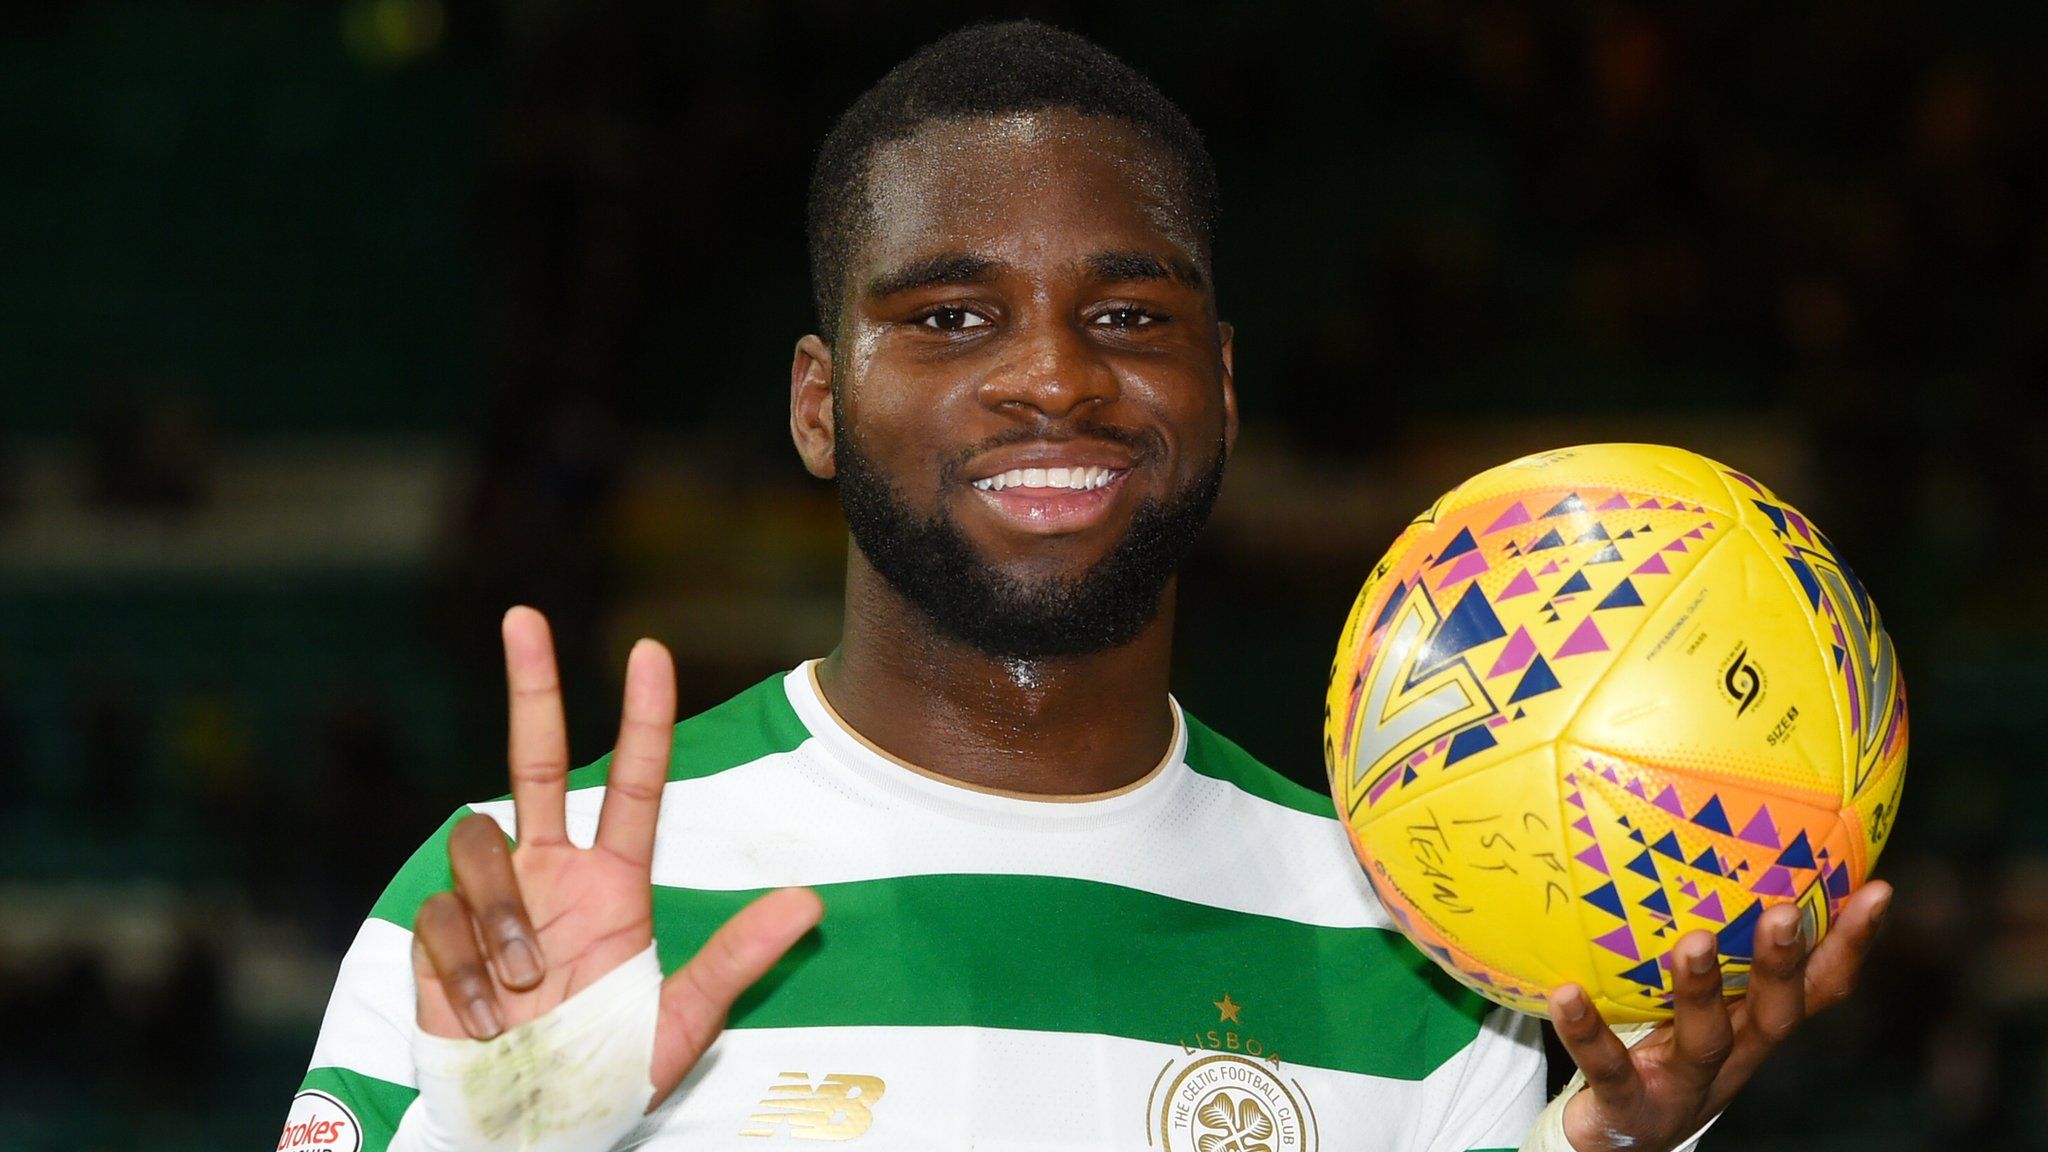 Odsonne Edouard celebrates with the match ball after his hat-trick against Motherwell